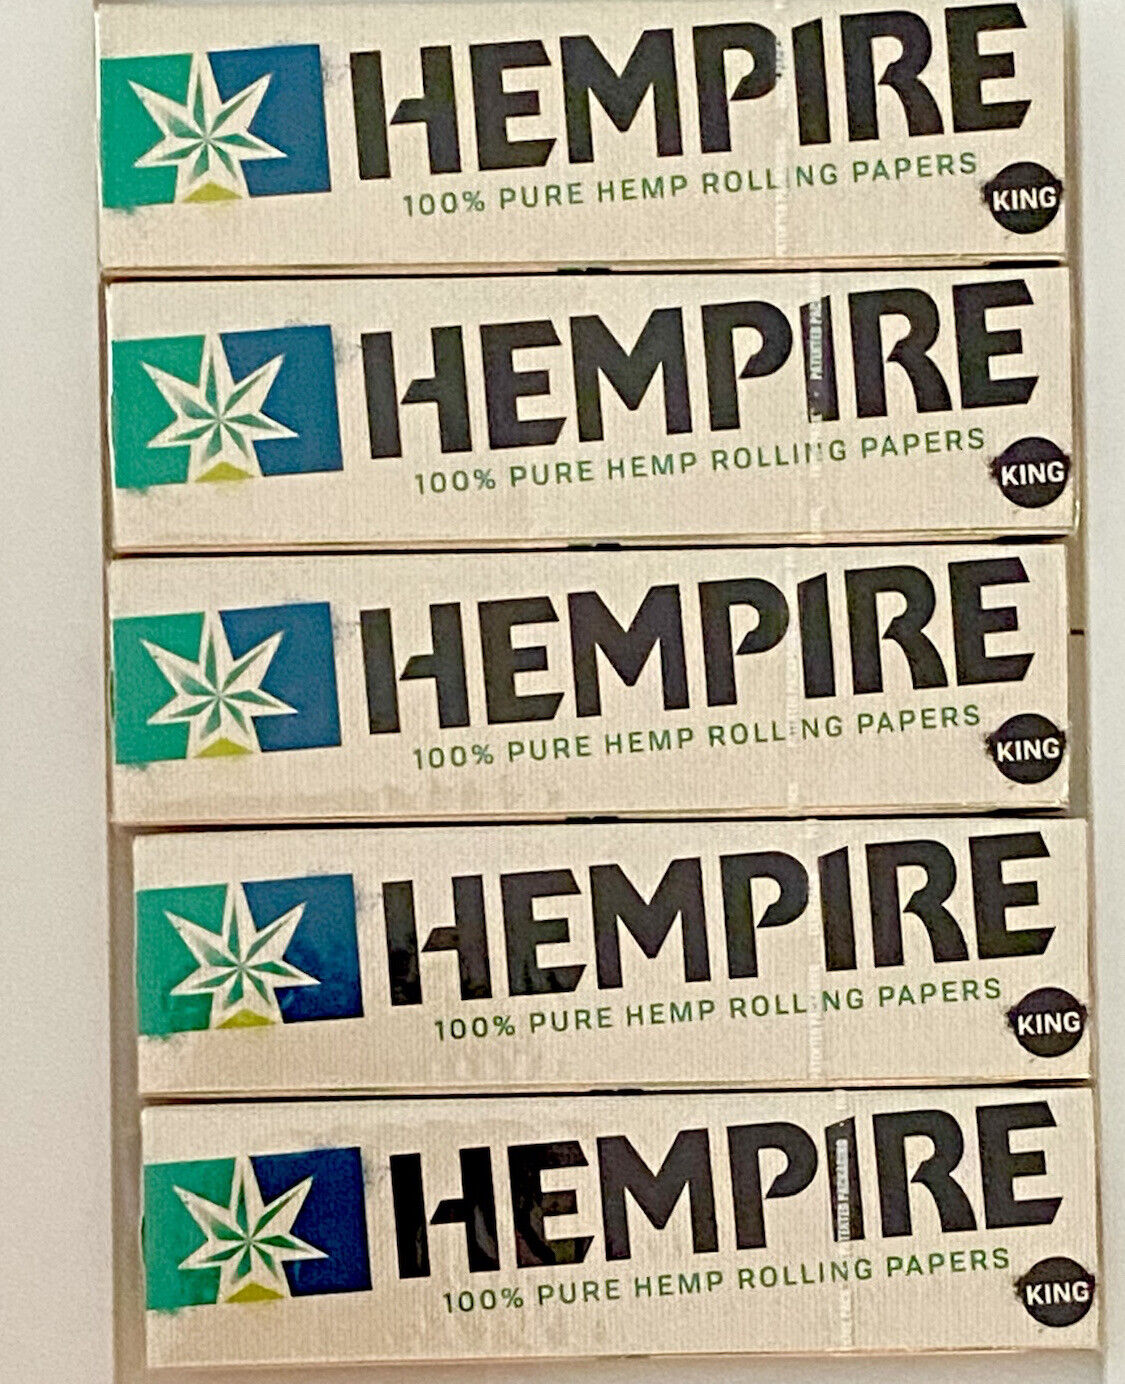 Hempire 100% pure hemp Rolling papers King Size 25 packs 33 leaves each pack